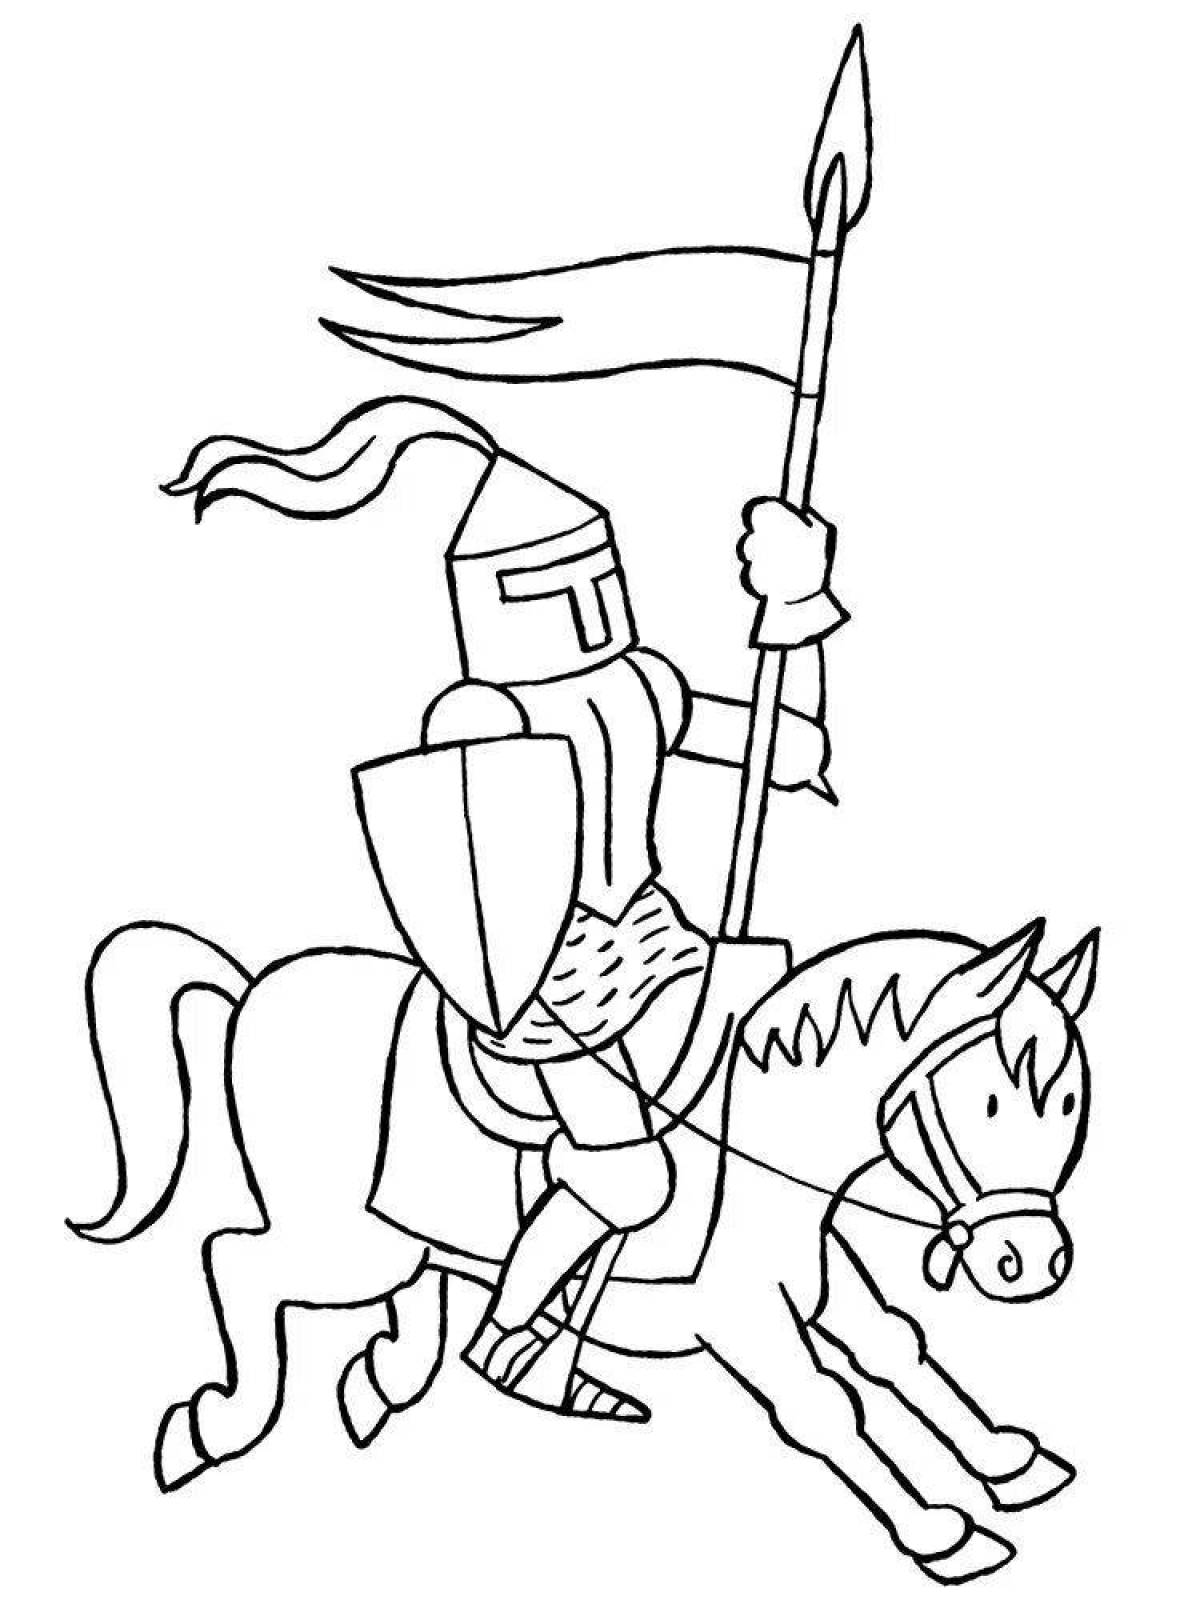 Gold-plated knight coloring book for children